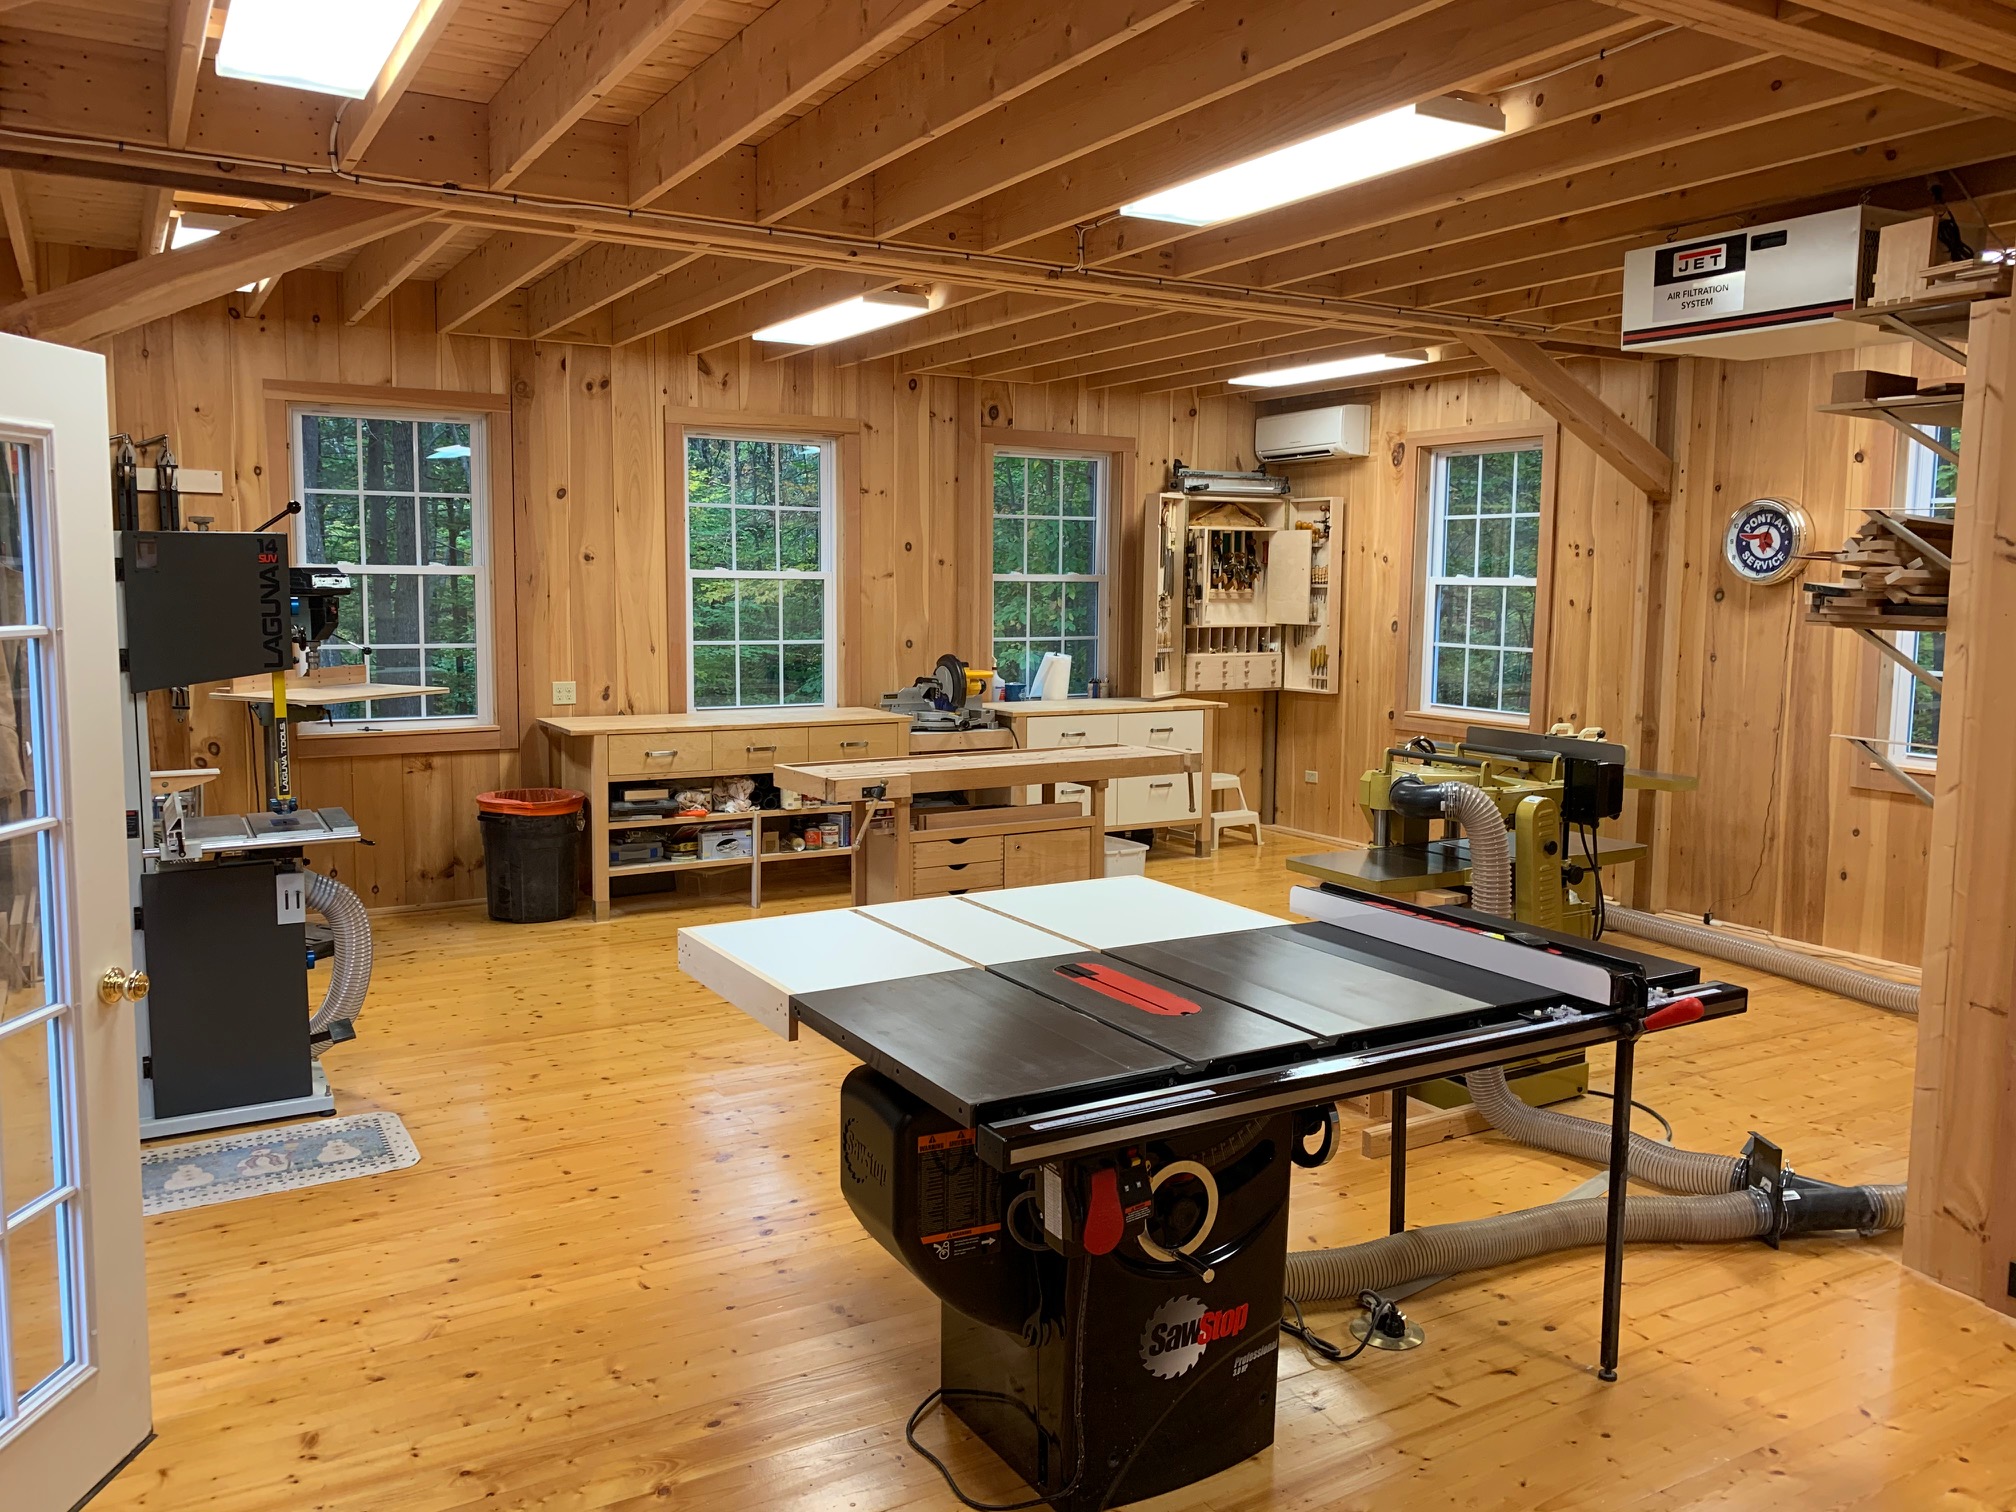 An interior picture of a custom woodworking shop, design and built by Geobarns, showing careful layout of sop equipment and dust collection system.